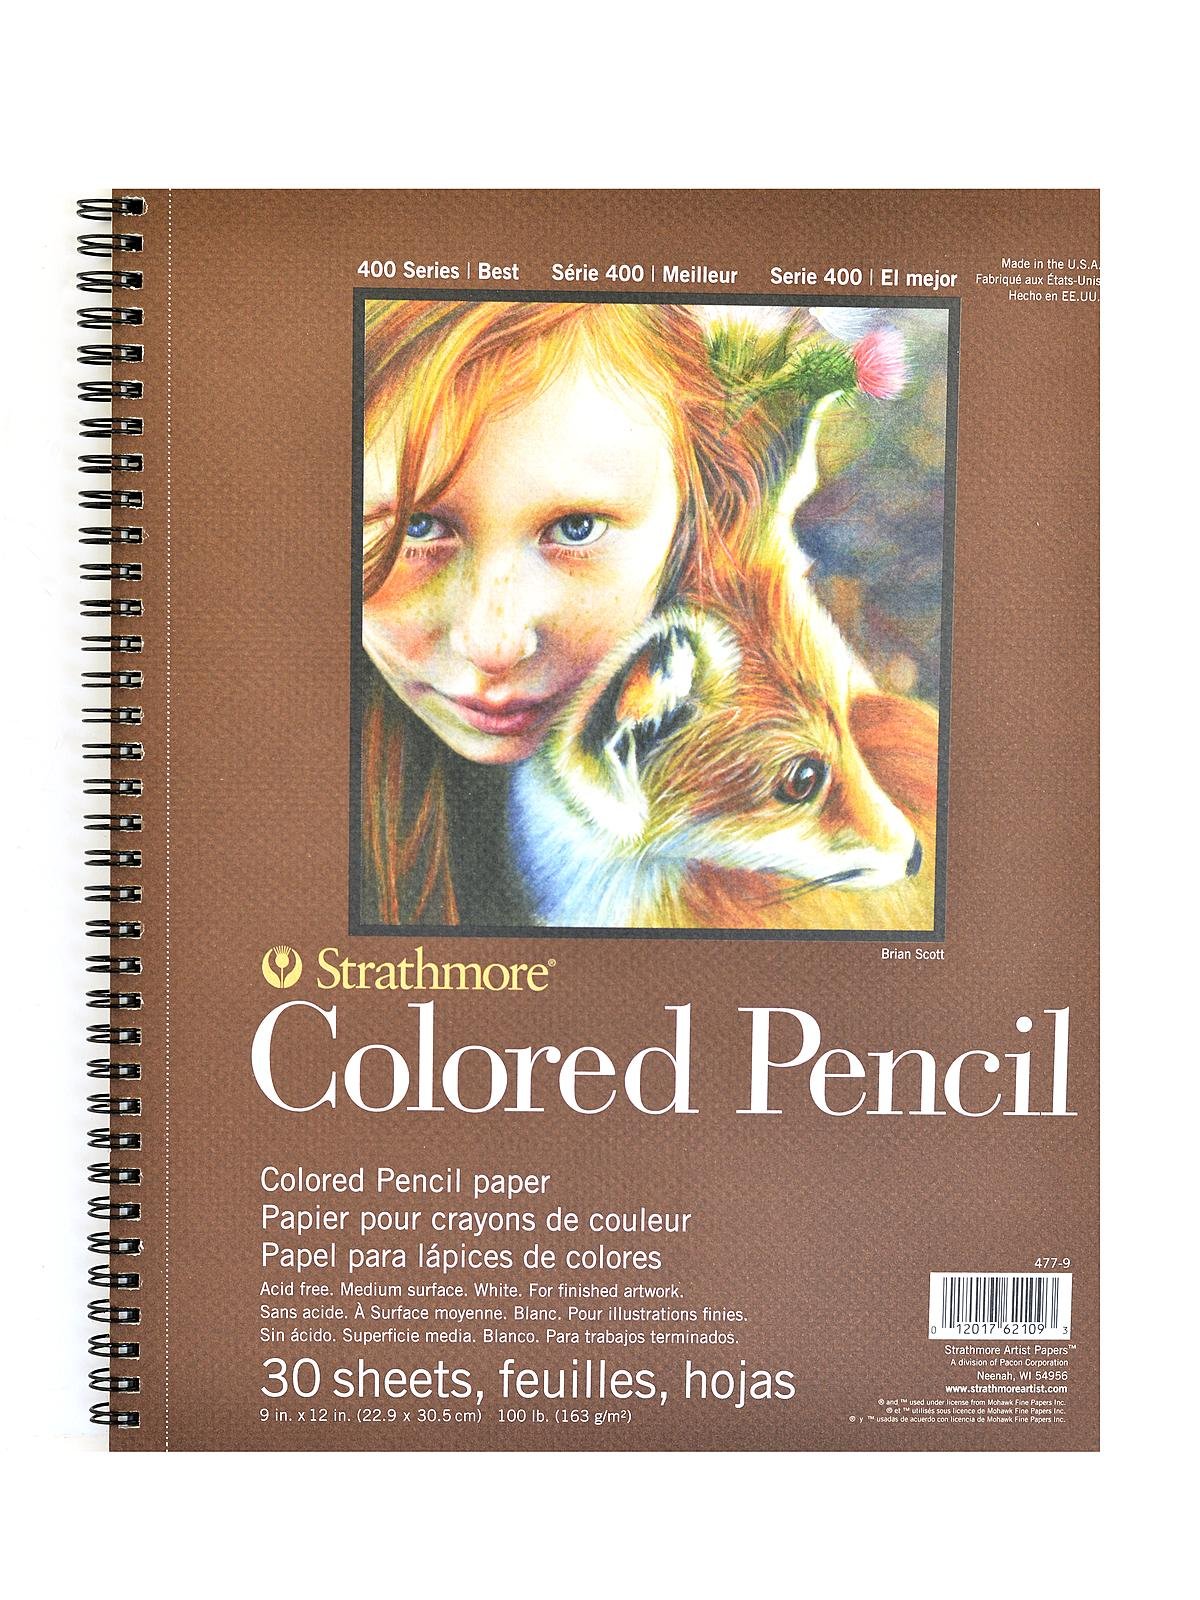 Strathmore 400 Series Colored Pencil Pad